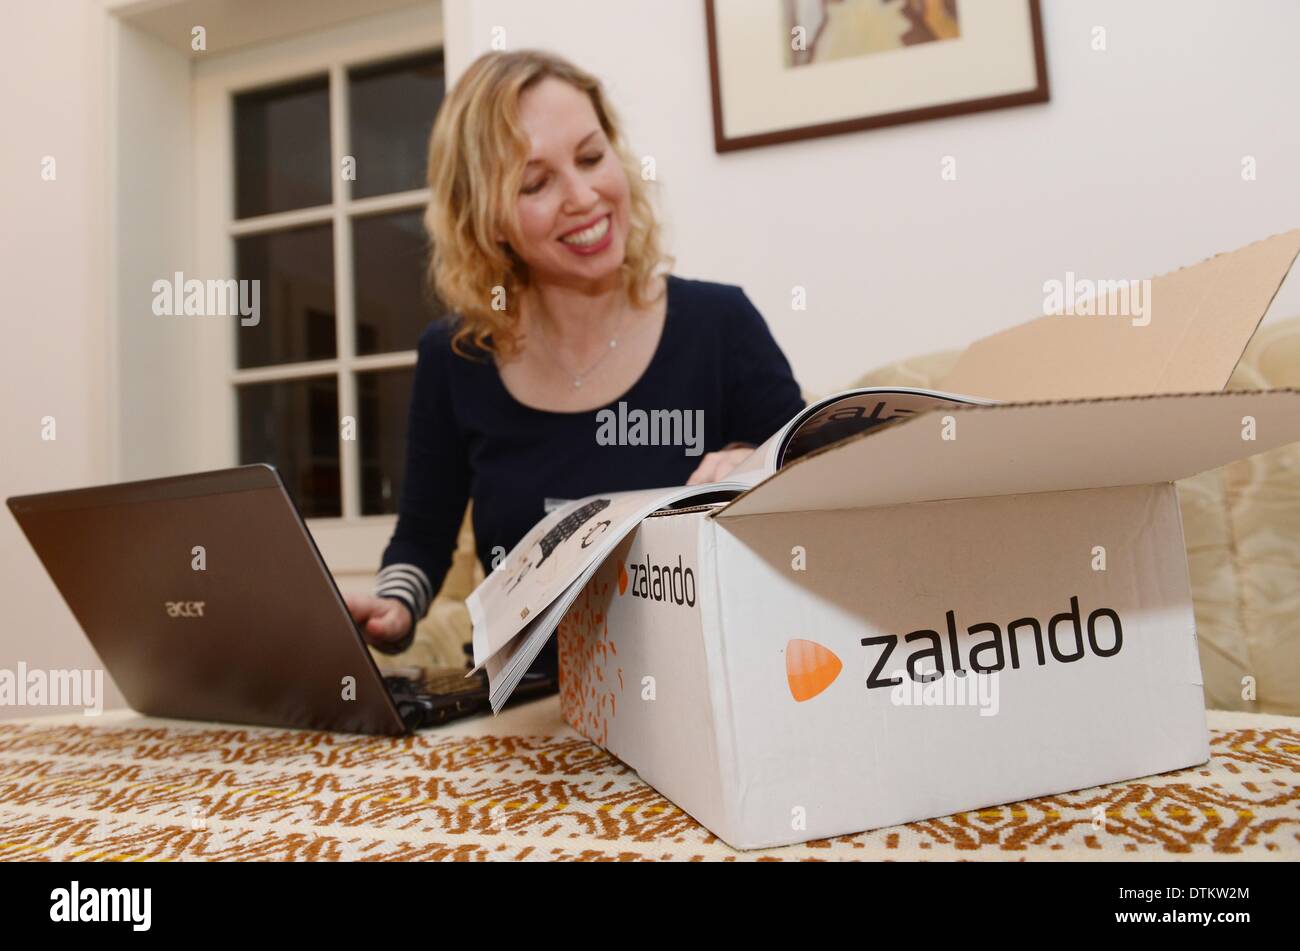 Berlin, Germany. 23rd Dec, 2012. A woman orders online at the electronic commerce company Zalando in Berlin, Germany, 23 December 2012. Photo: Jens Kalaene/dpa/Alamy Live News Stock Photo